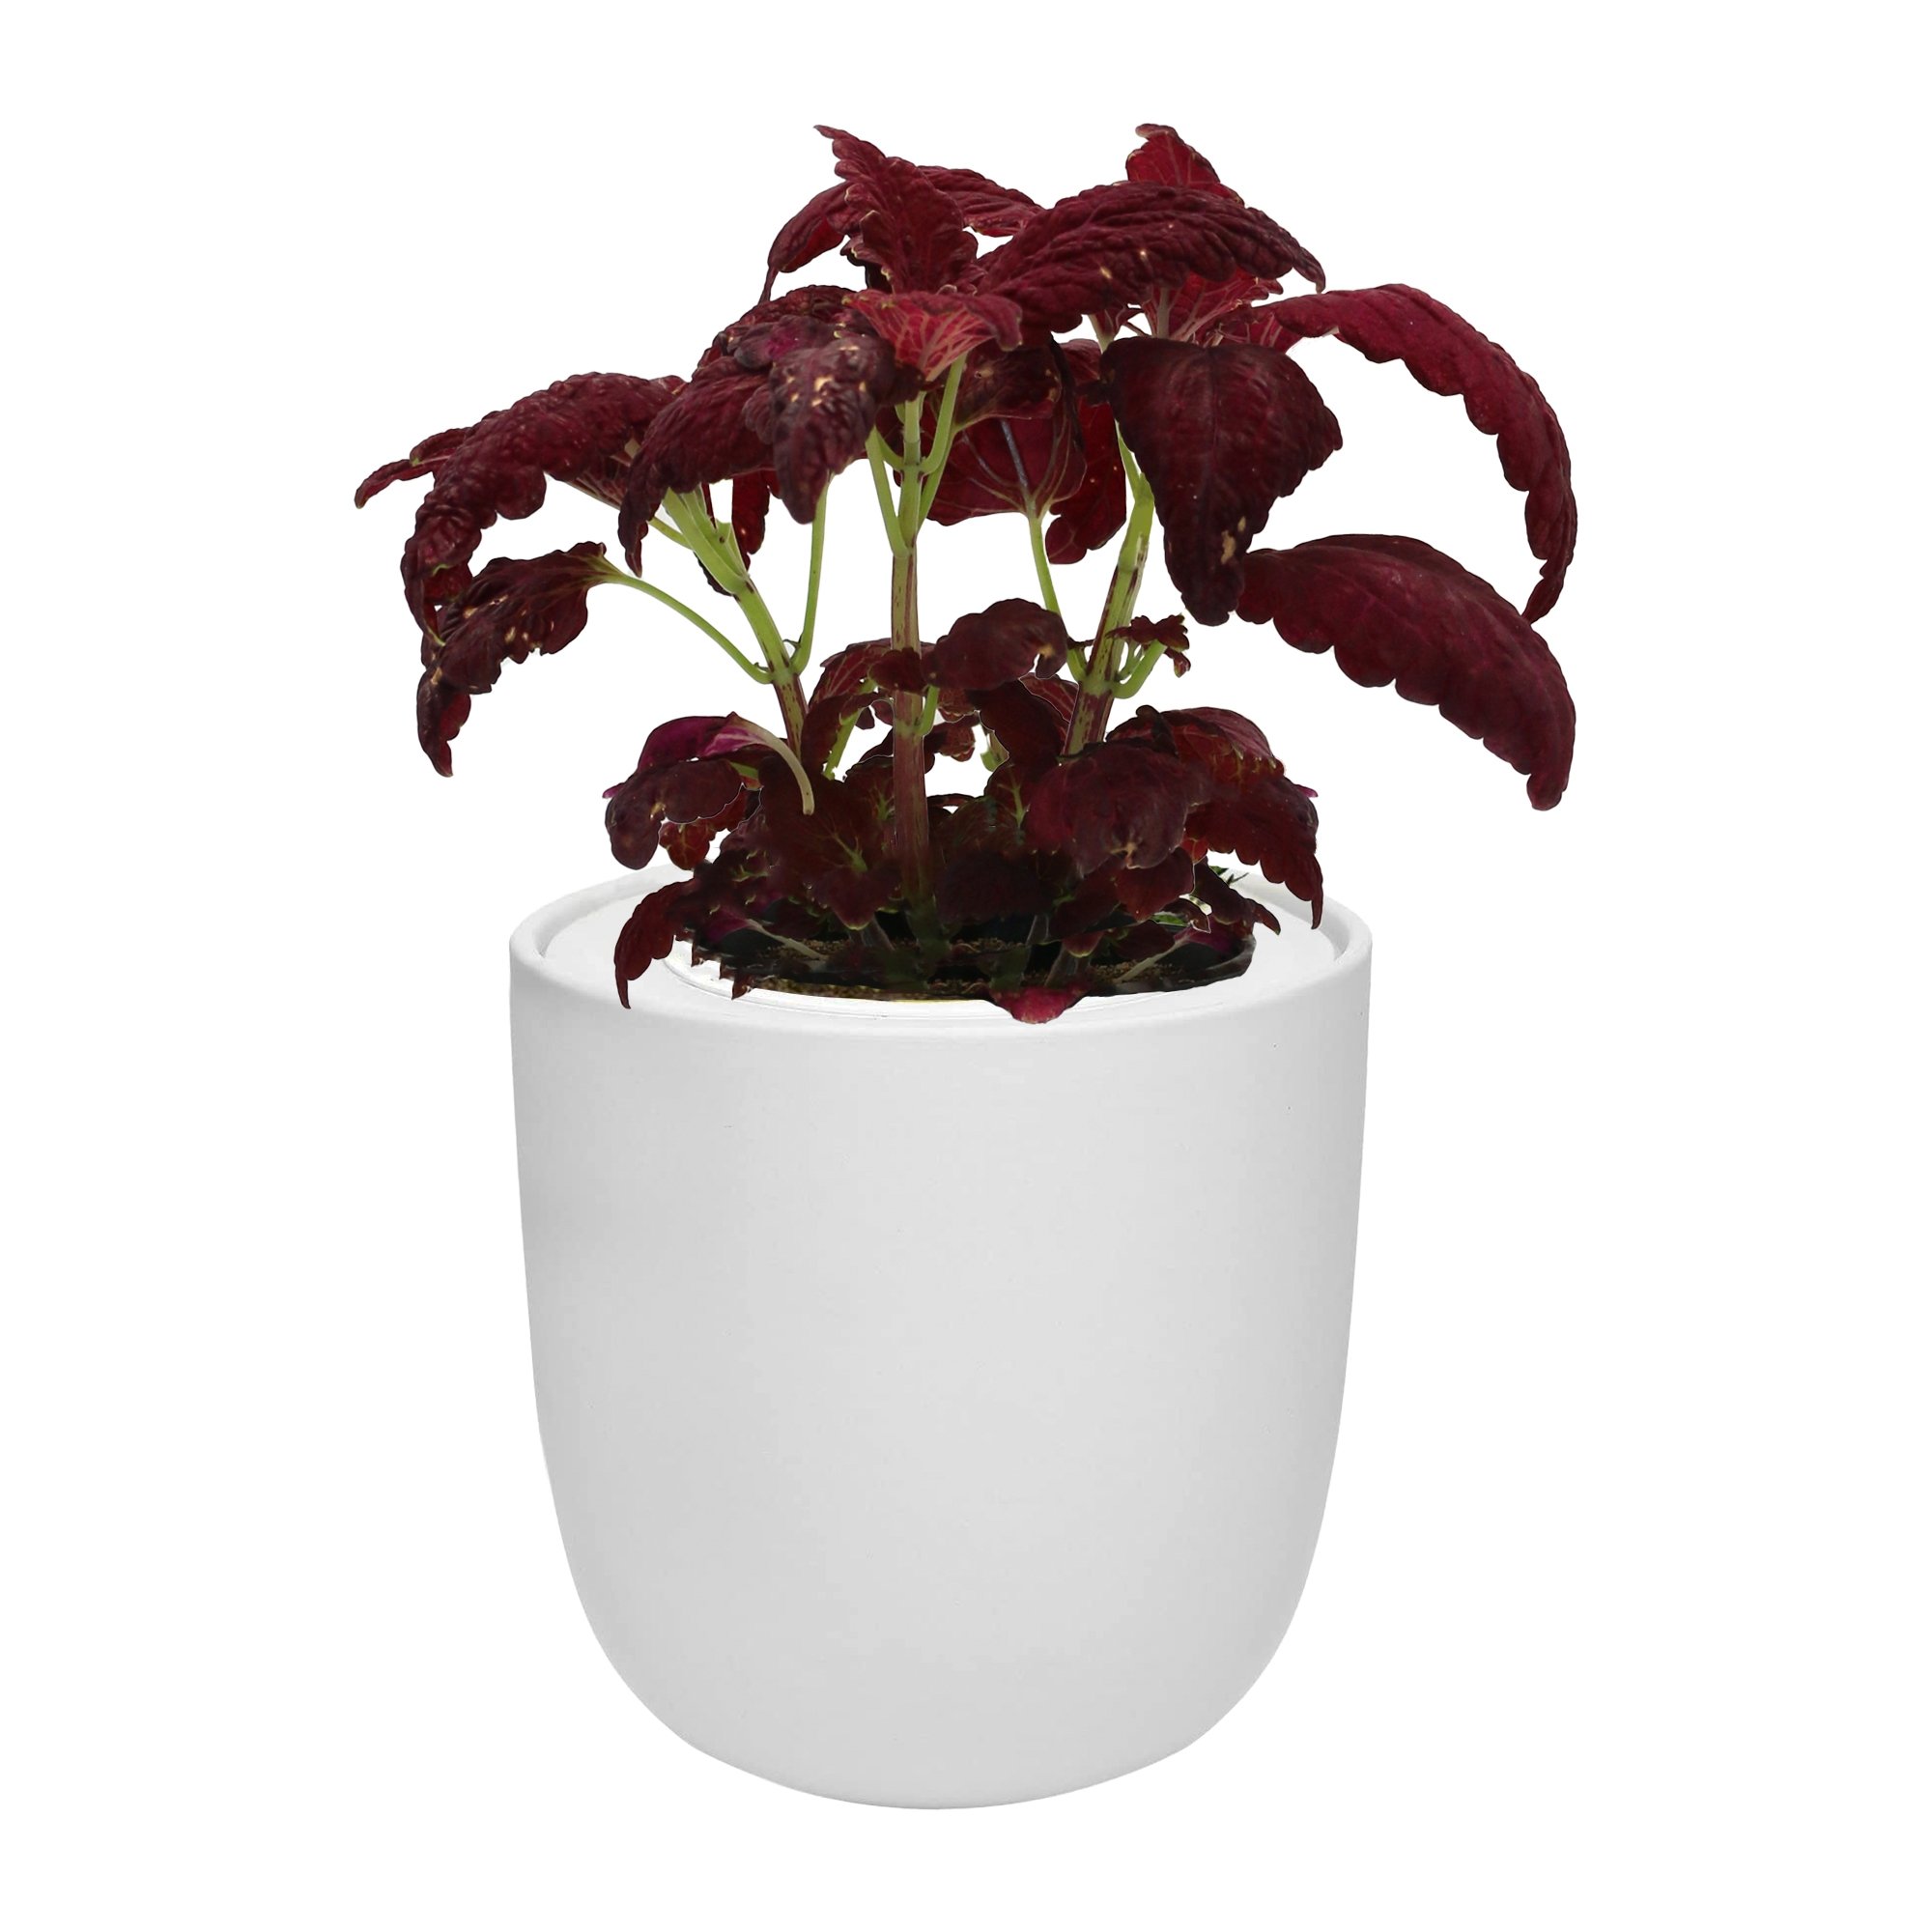 Hydroponic Growing Kit with White Ceramic Pot and Seeds (W-Coleus - Black Dragon)